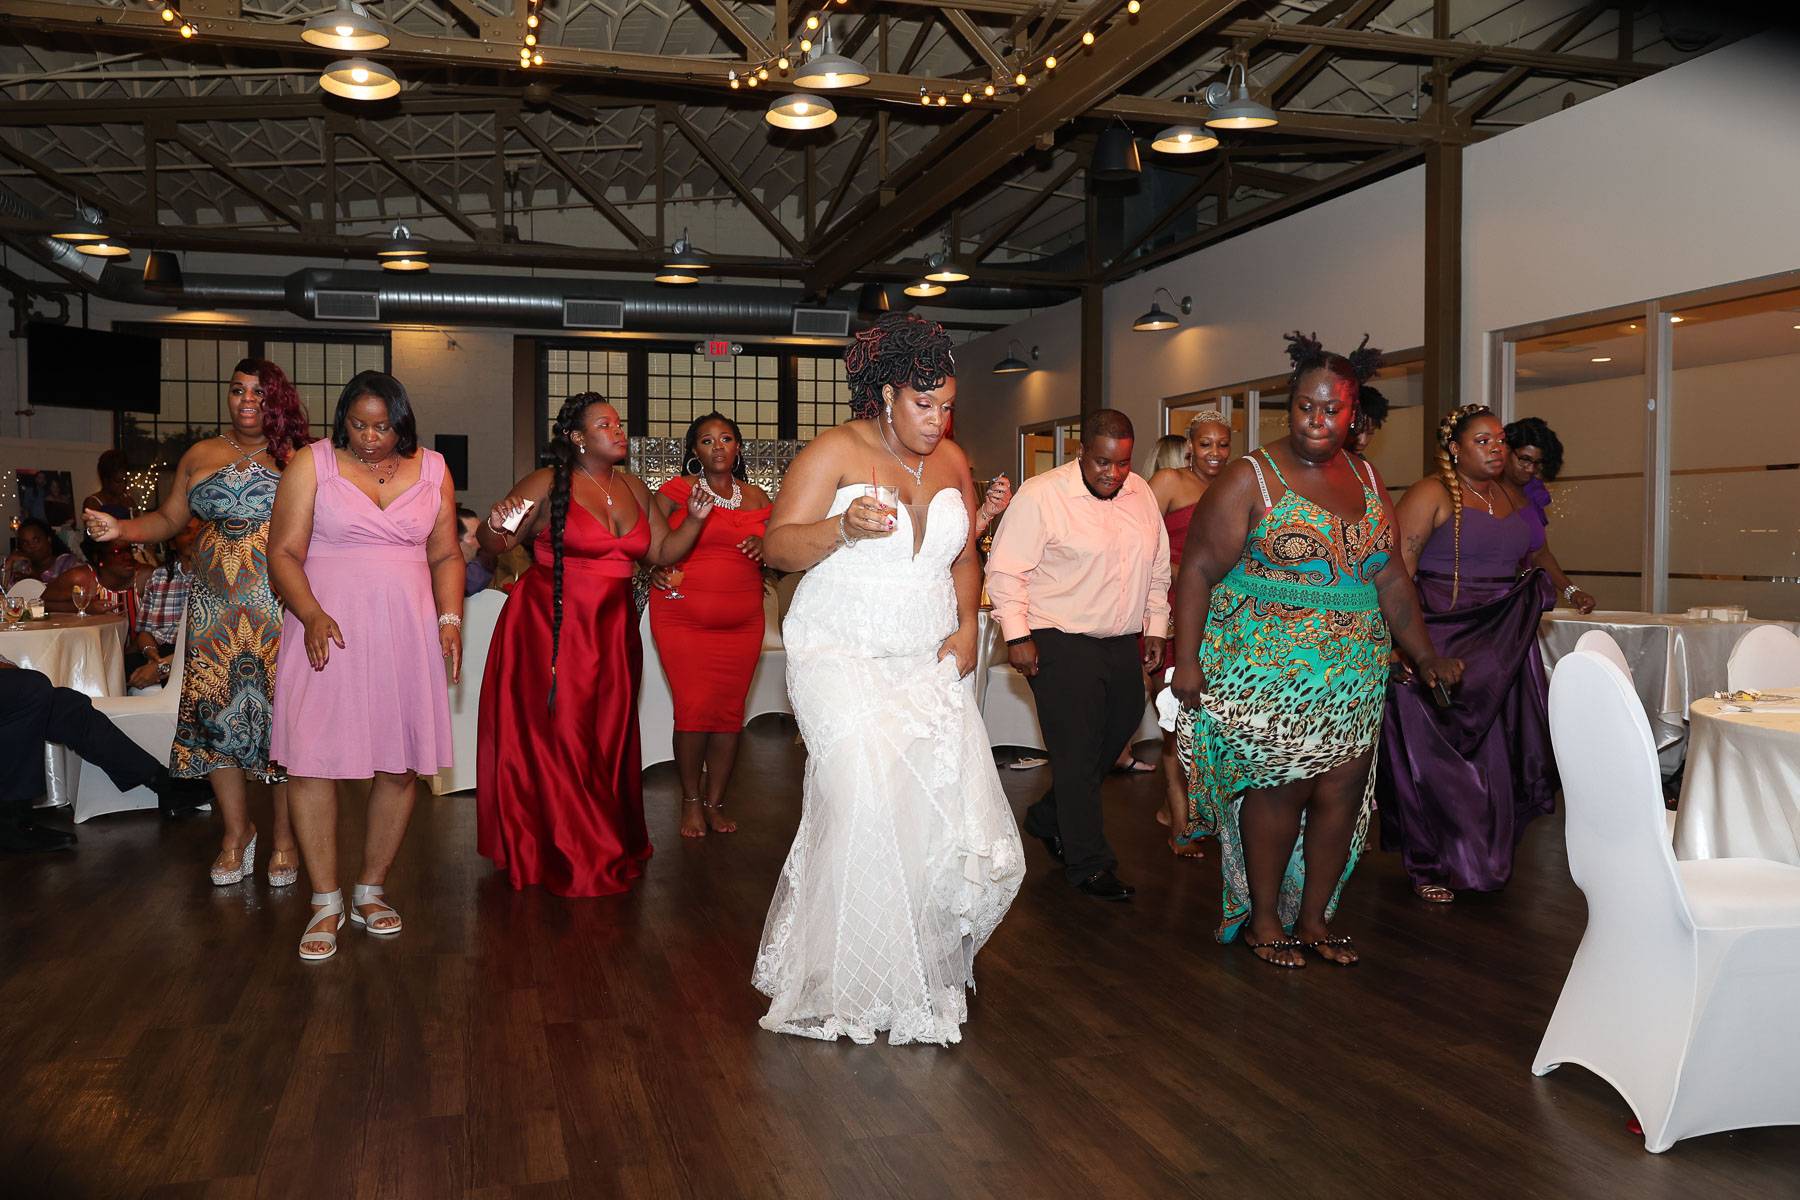 The bride and the guests dancing to the rhythm